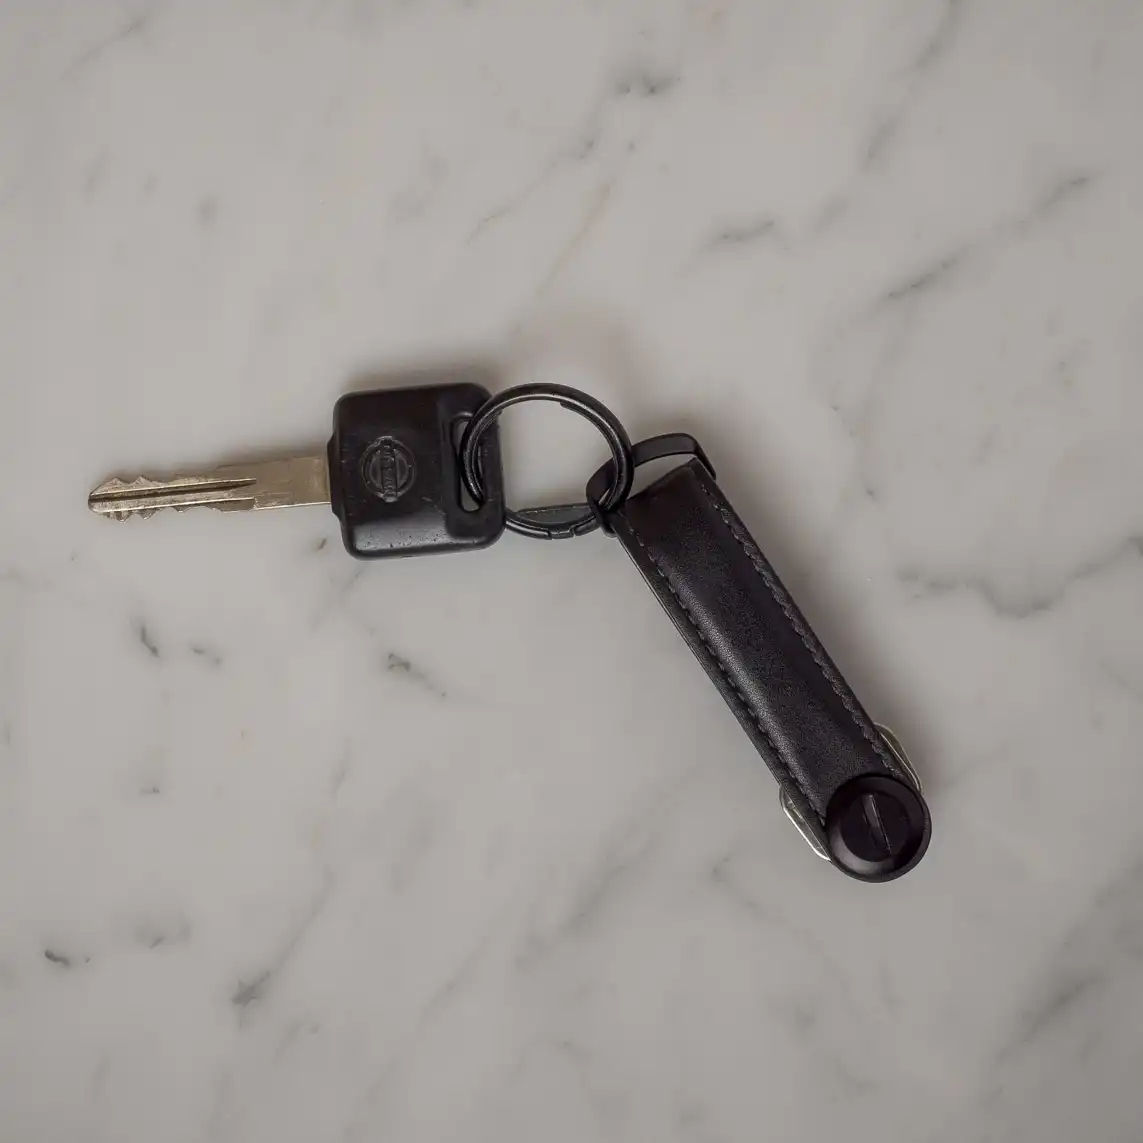 The 13 Best Key Organizers for 2023 - The Modest Man